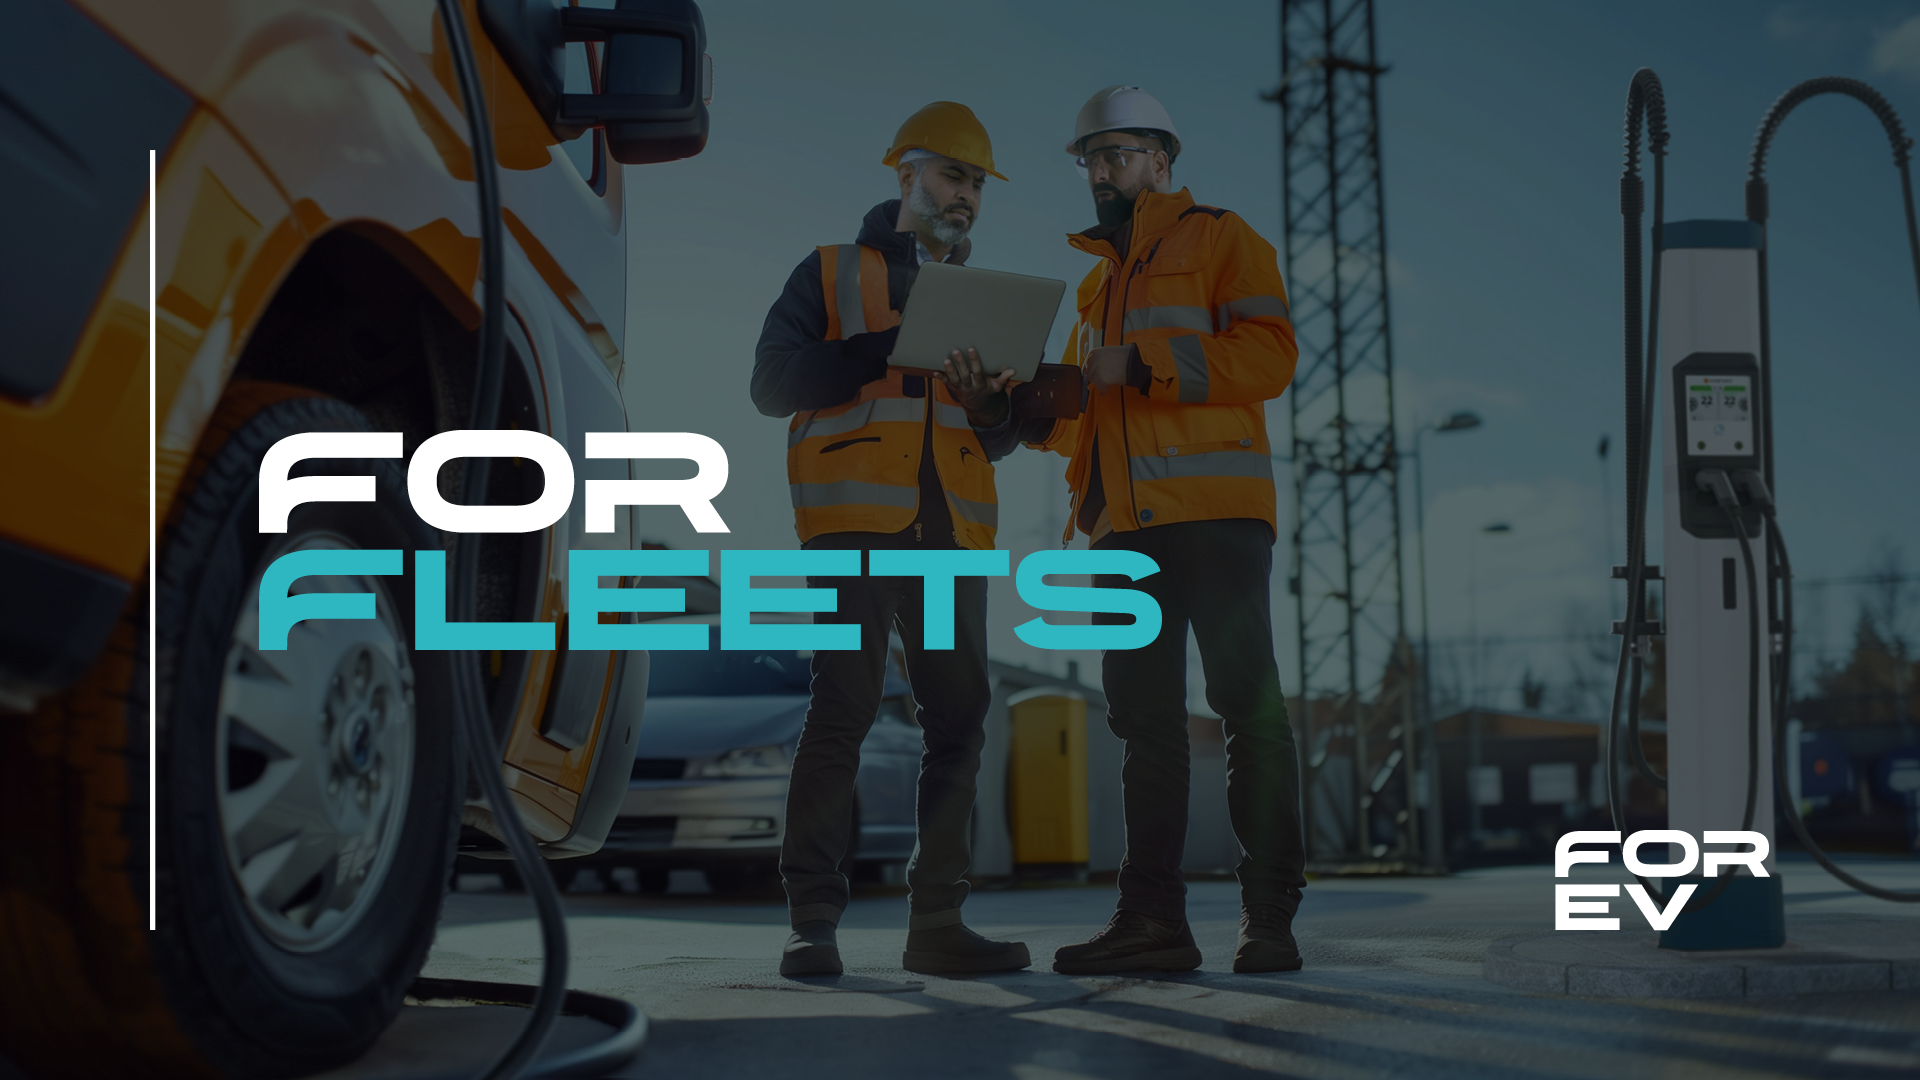 FOR Fleets – We make your fleet electrification simple, rewarding and risk-free